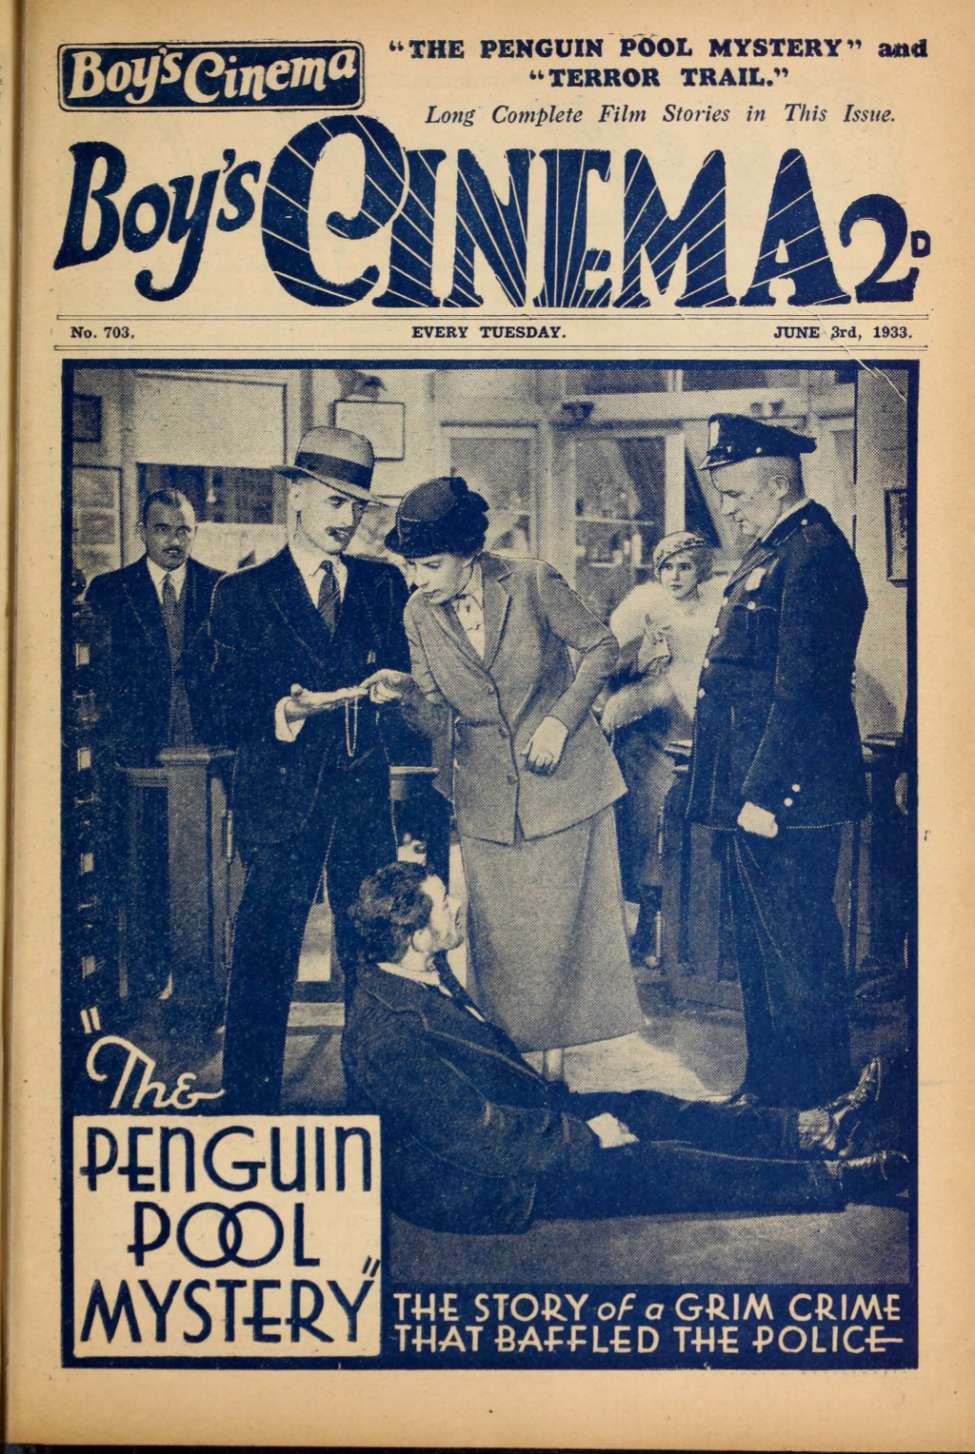 Book Cover For Boy's Cinema 703 - The Penguin Pool Mystery - Edna May Oliver